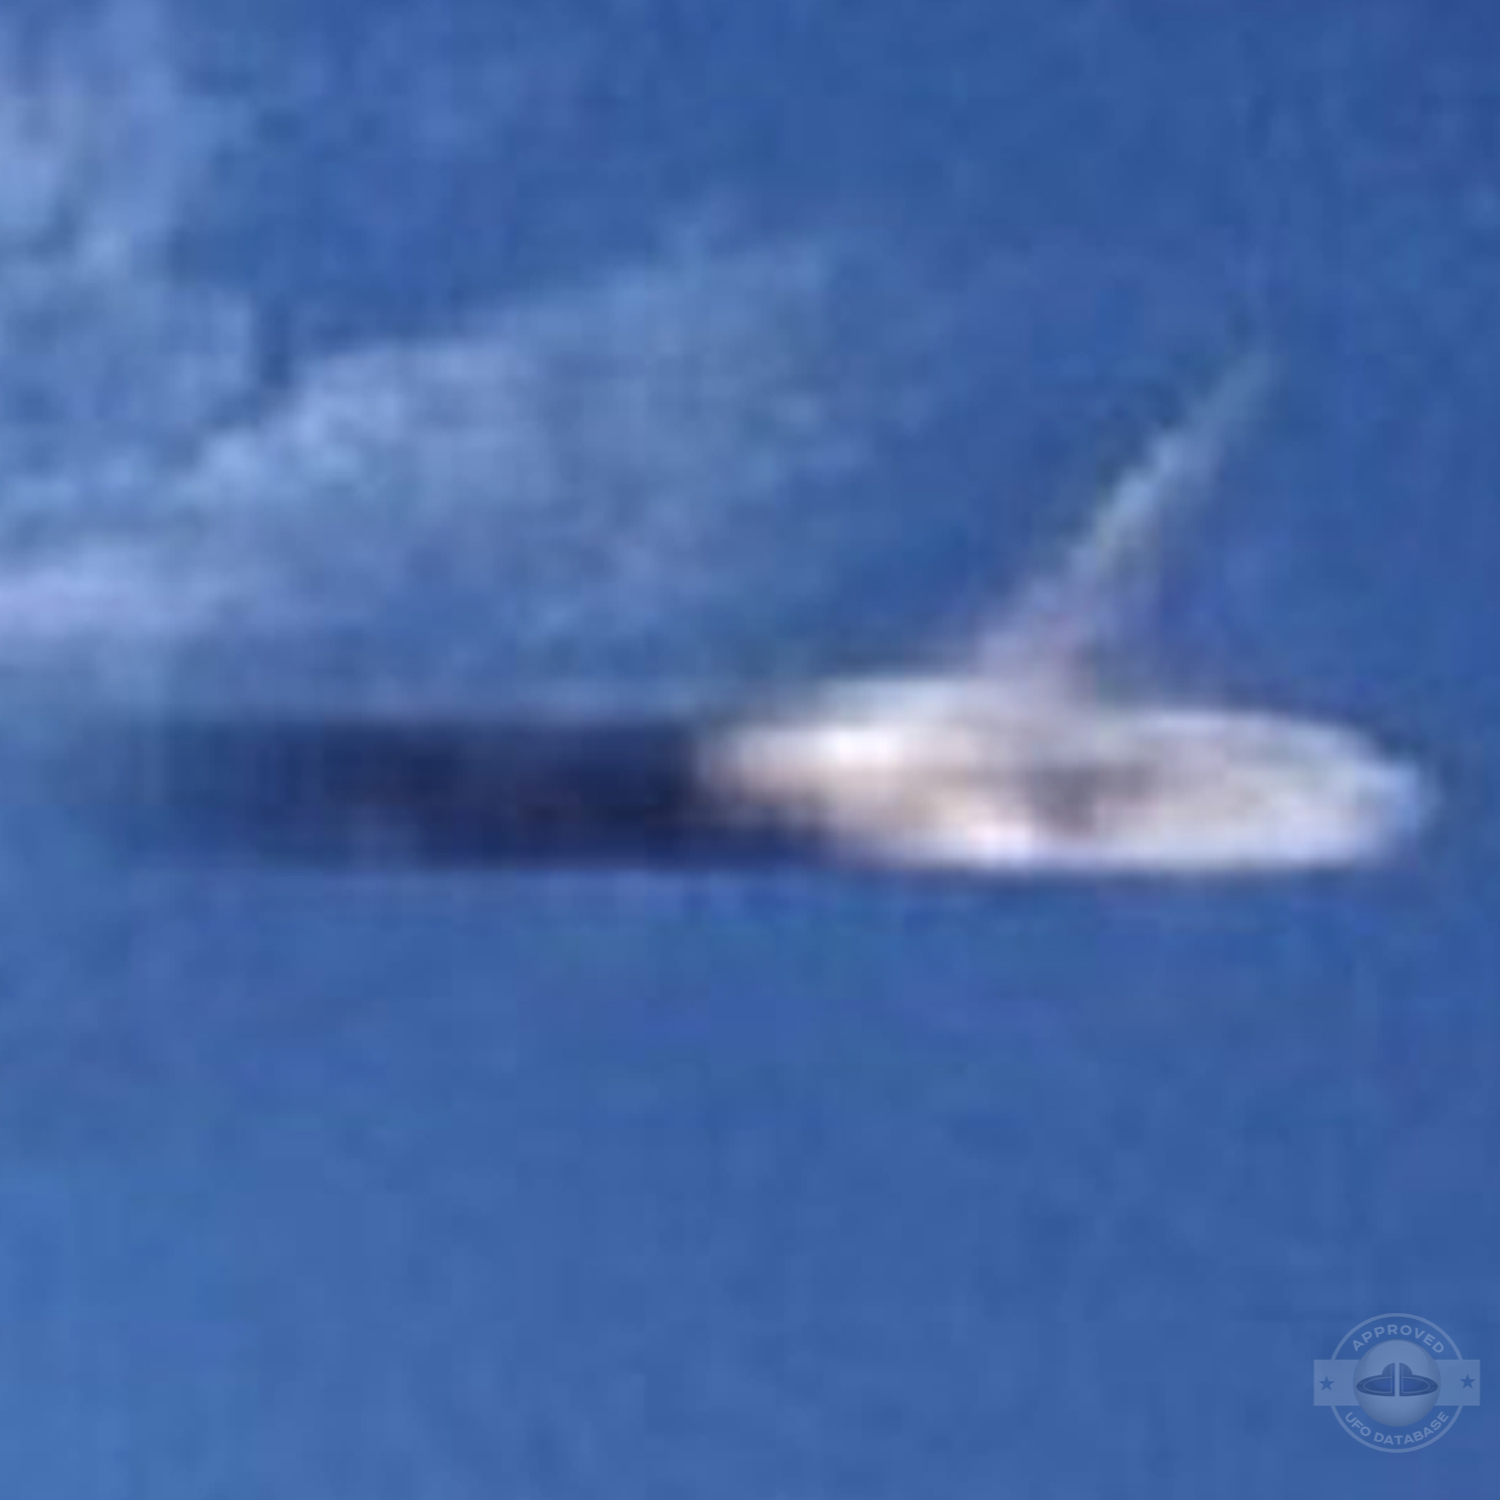 UFO picture shows movement of UFO by capturing the trace of the UFO UFO Picture #181-6